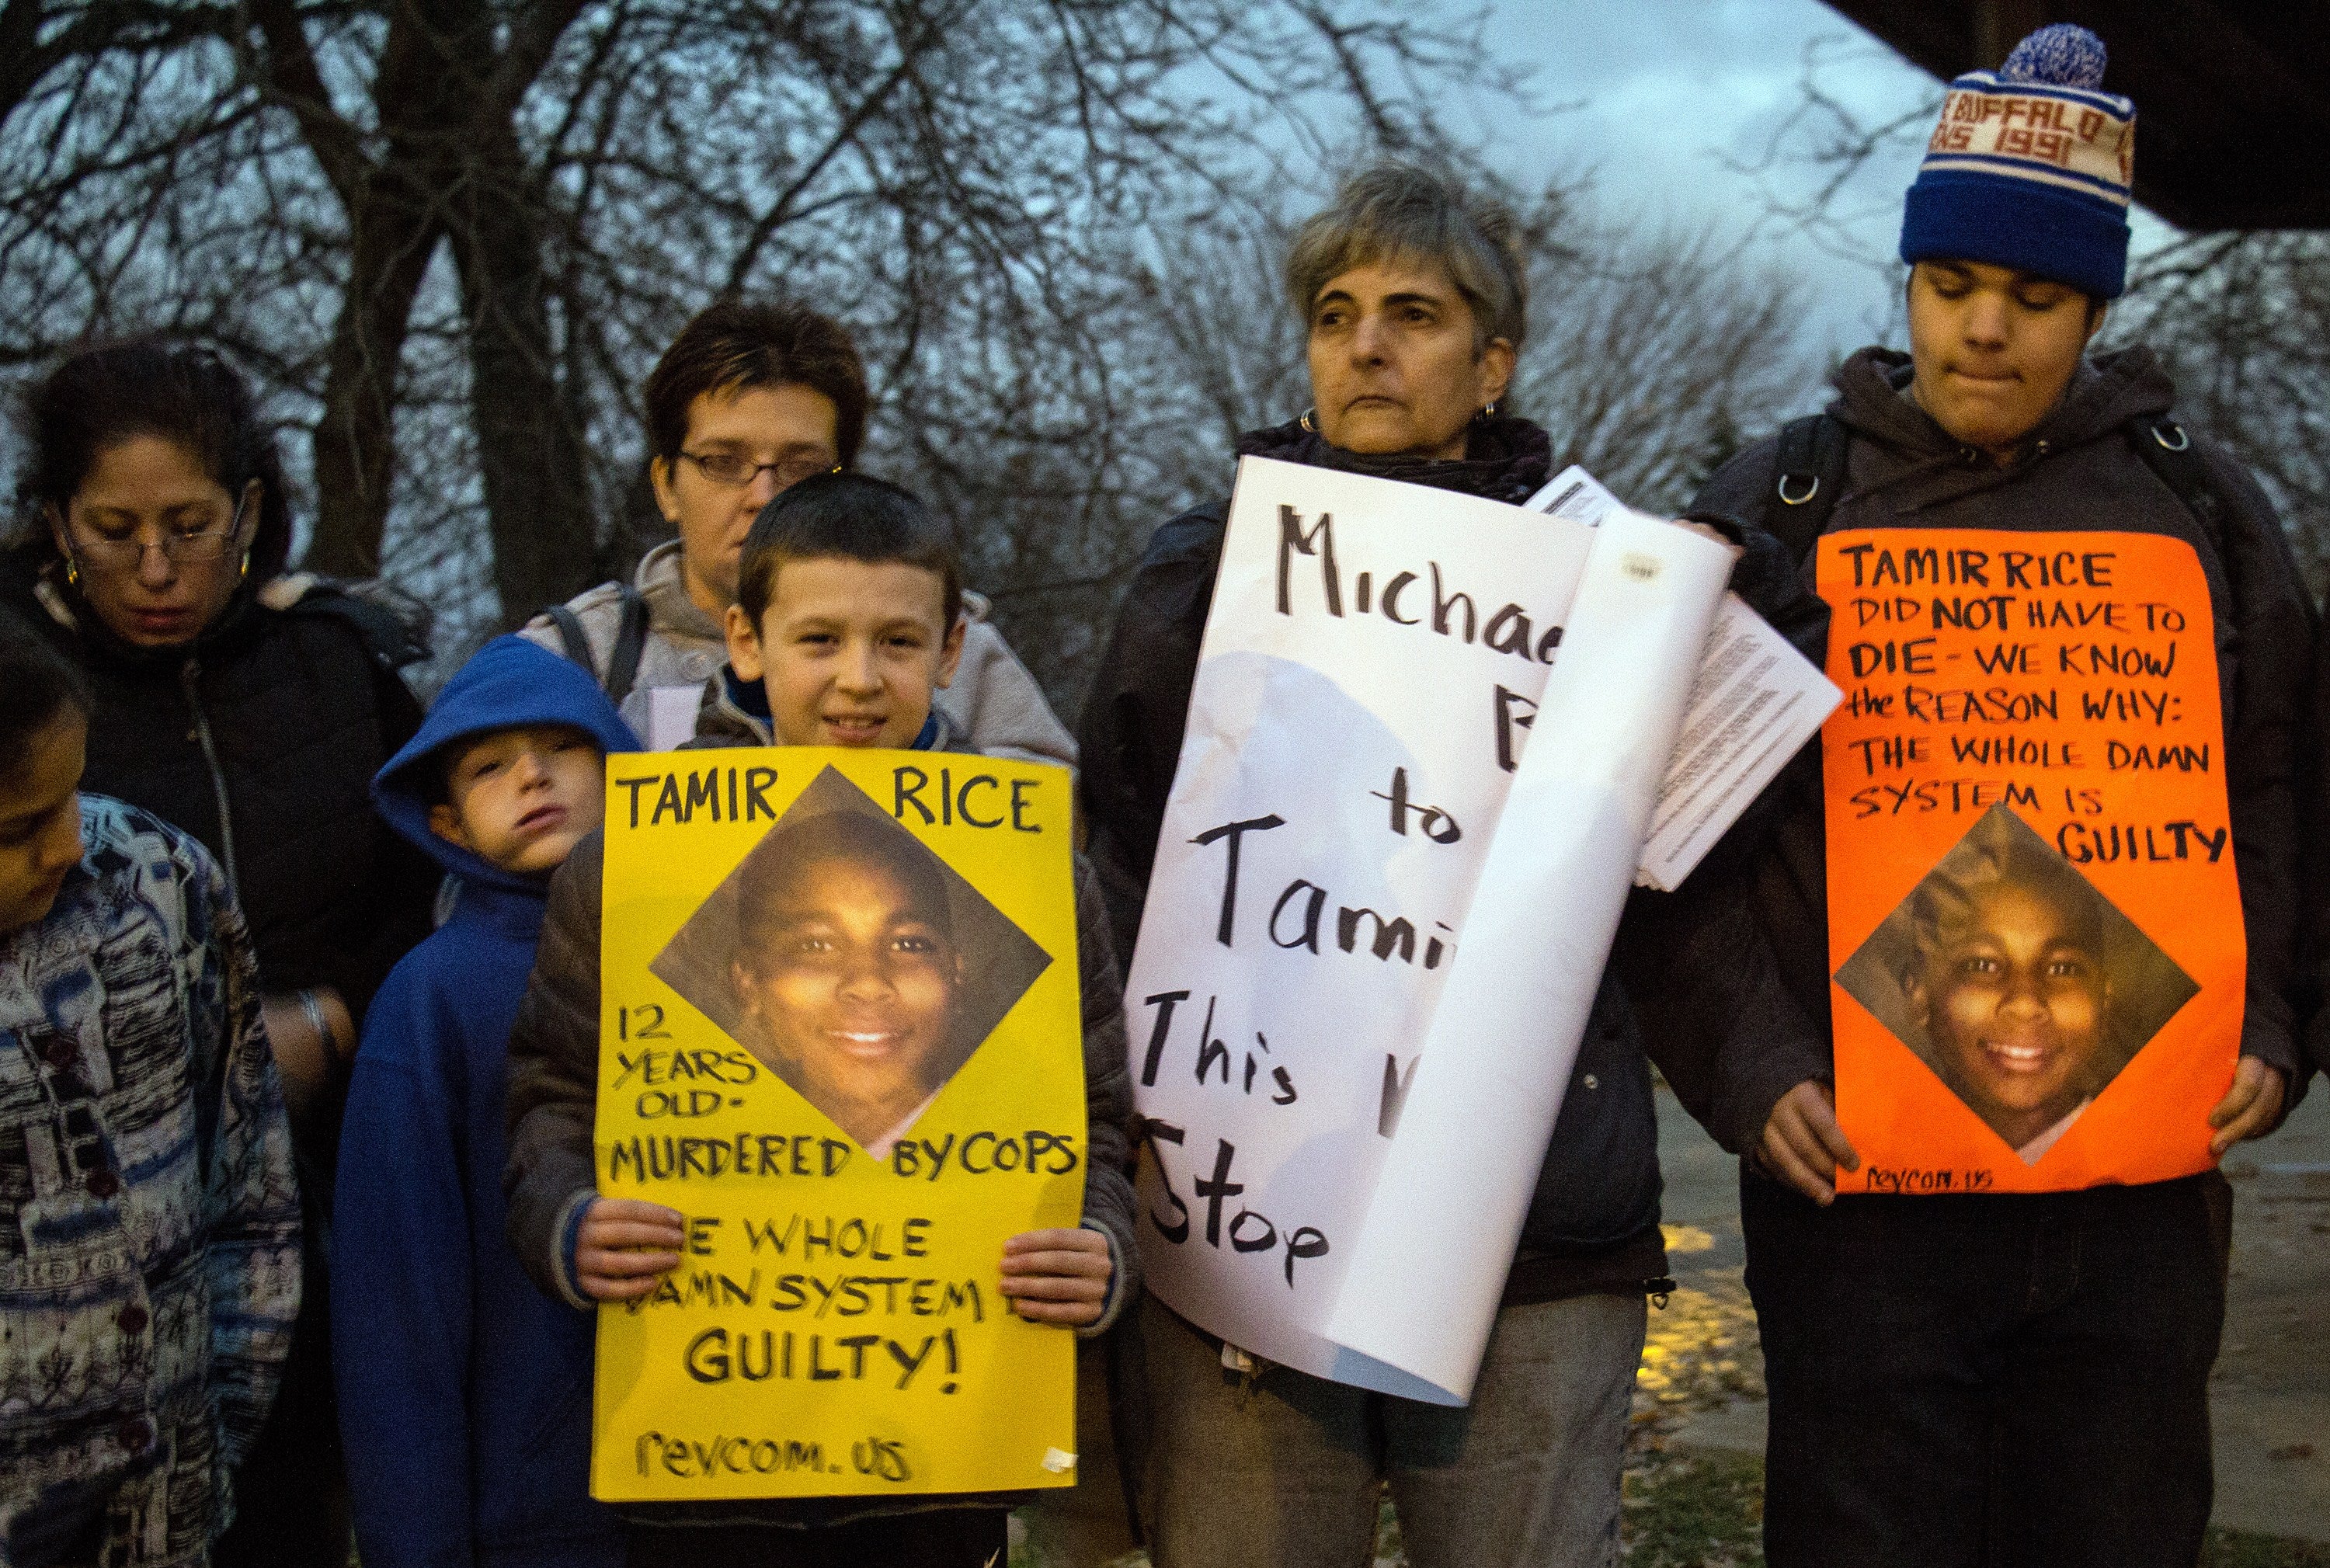 People display sigs at Cudell Commons Park in Cleveland, Ohio, November 24, 2014 during a rally for Tamir Rice, a 12-year-old boy shot by police on November 23